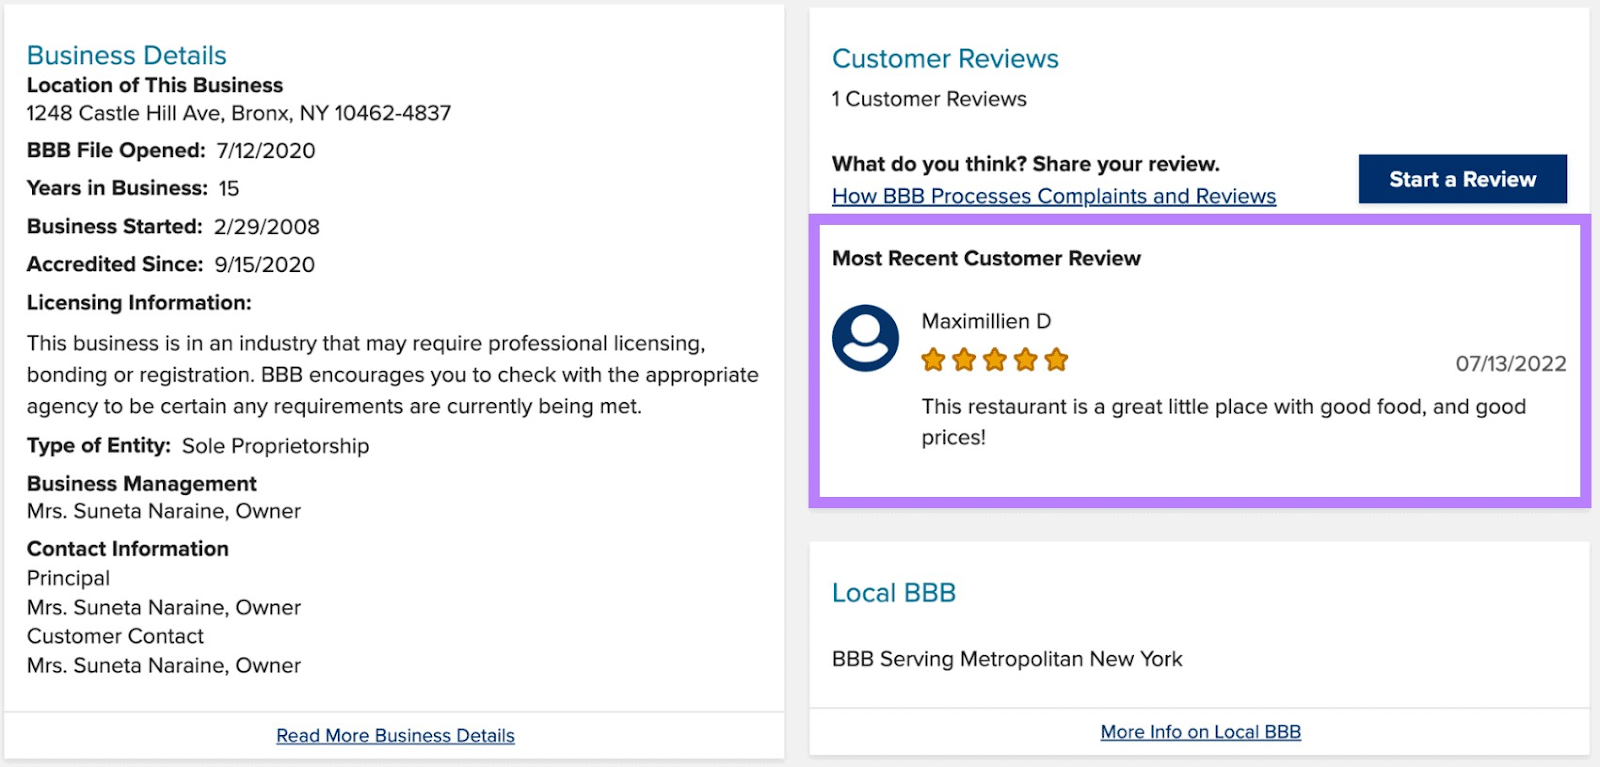 Better Business Bureau's page with business details and customer reviews